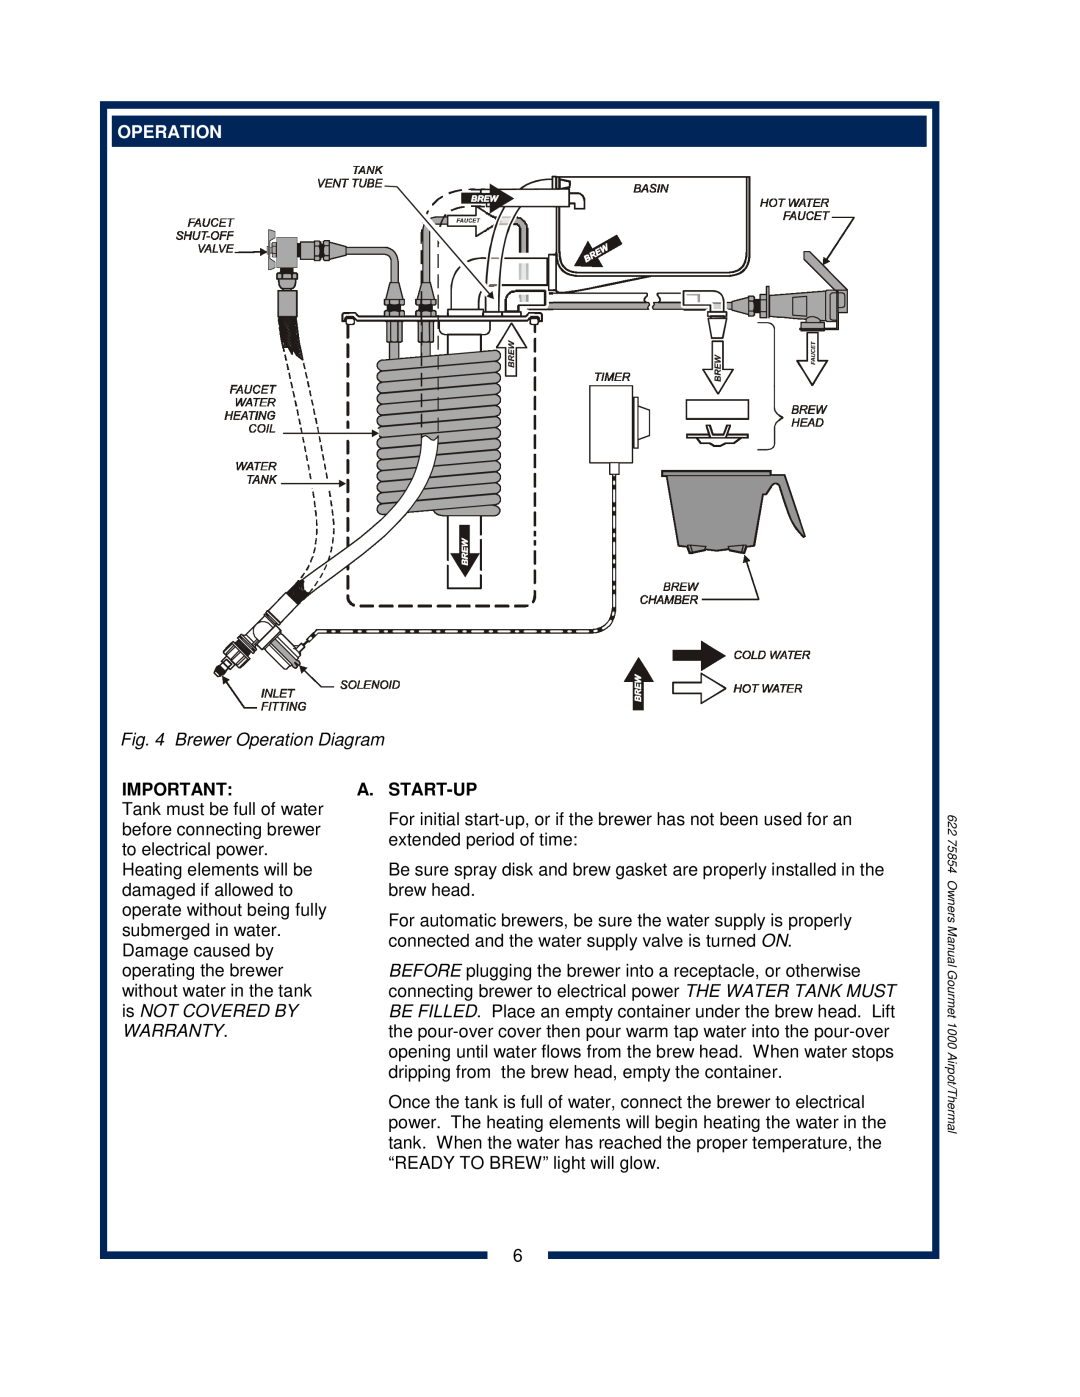 Bloomfield 8783, 8785, 8778, 8786, 8780, 8788, 8782 owner manual Brewer Operation Diagram, A. Start-Up 